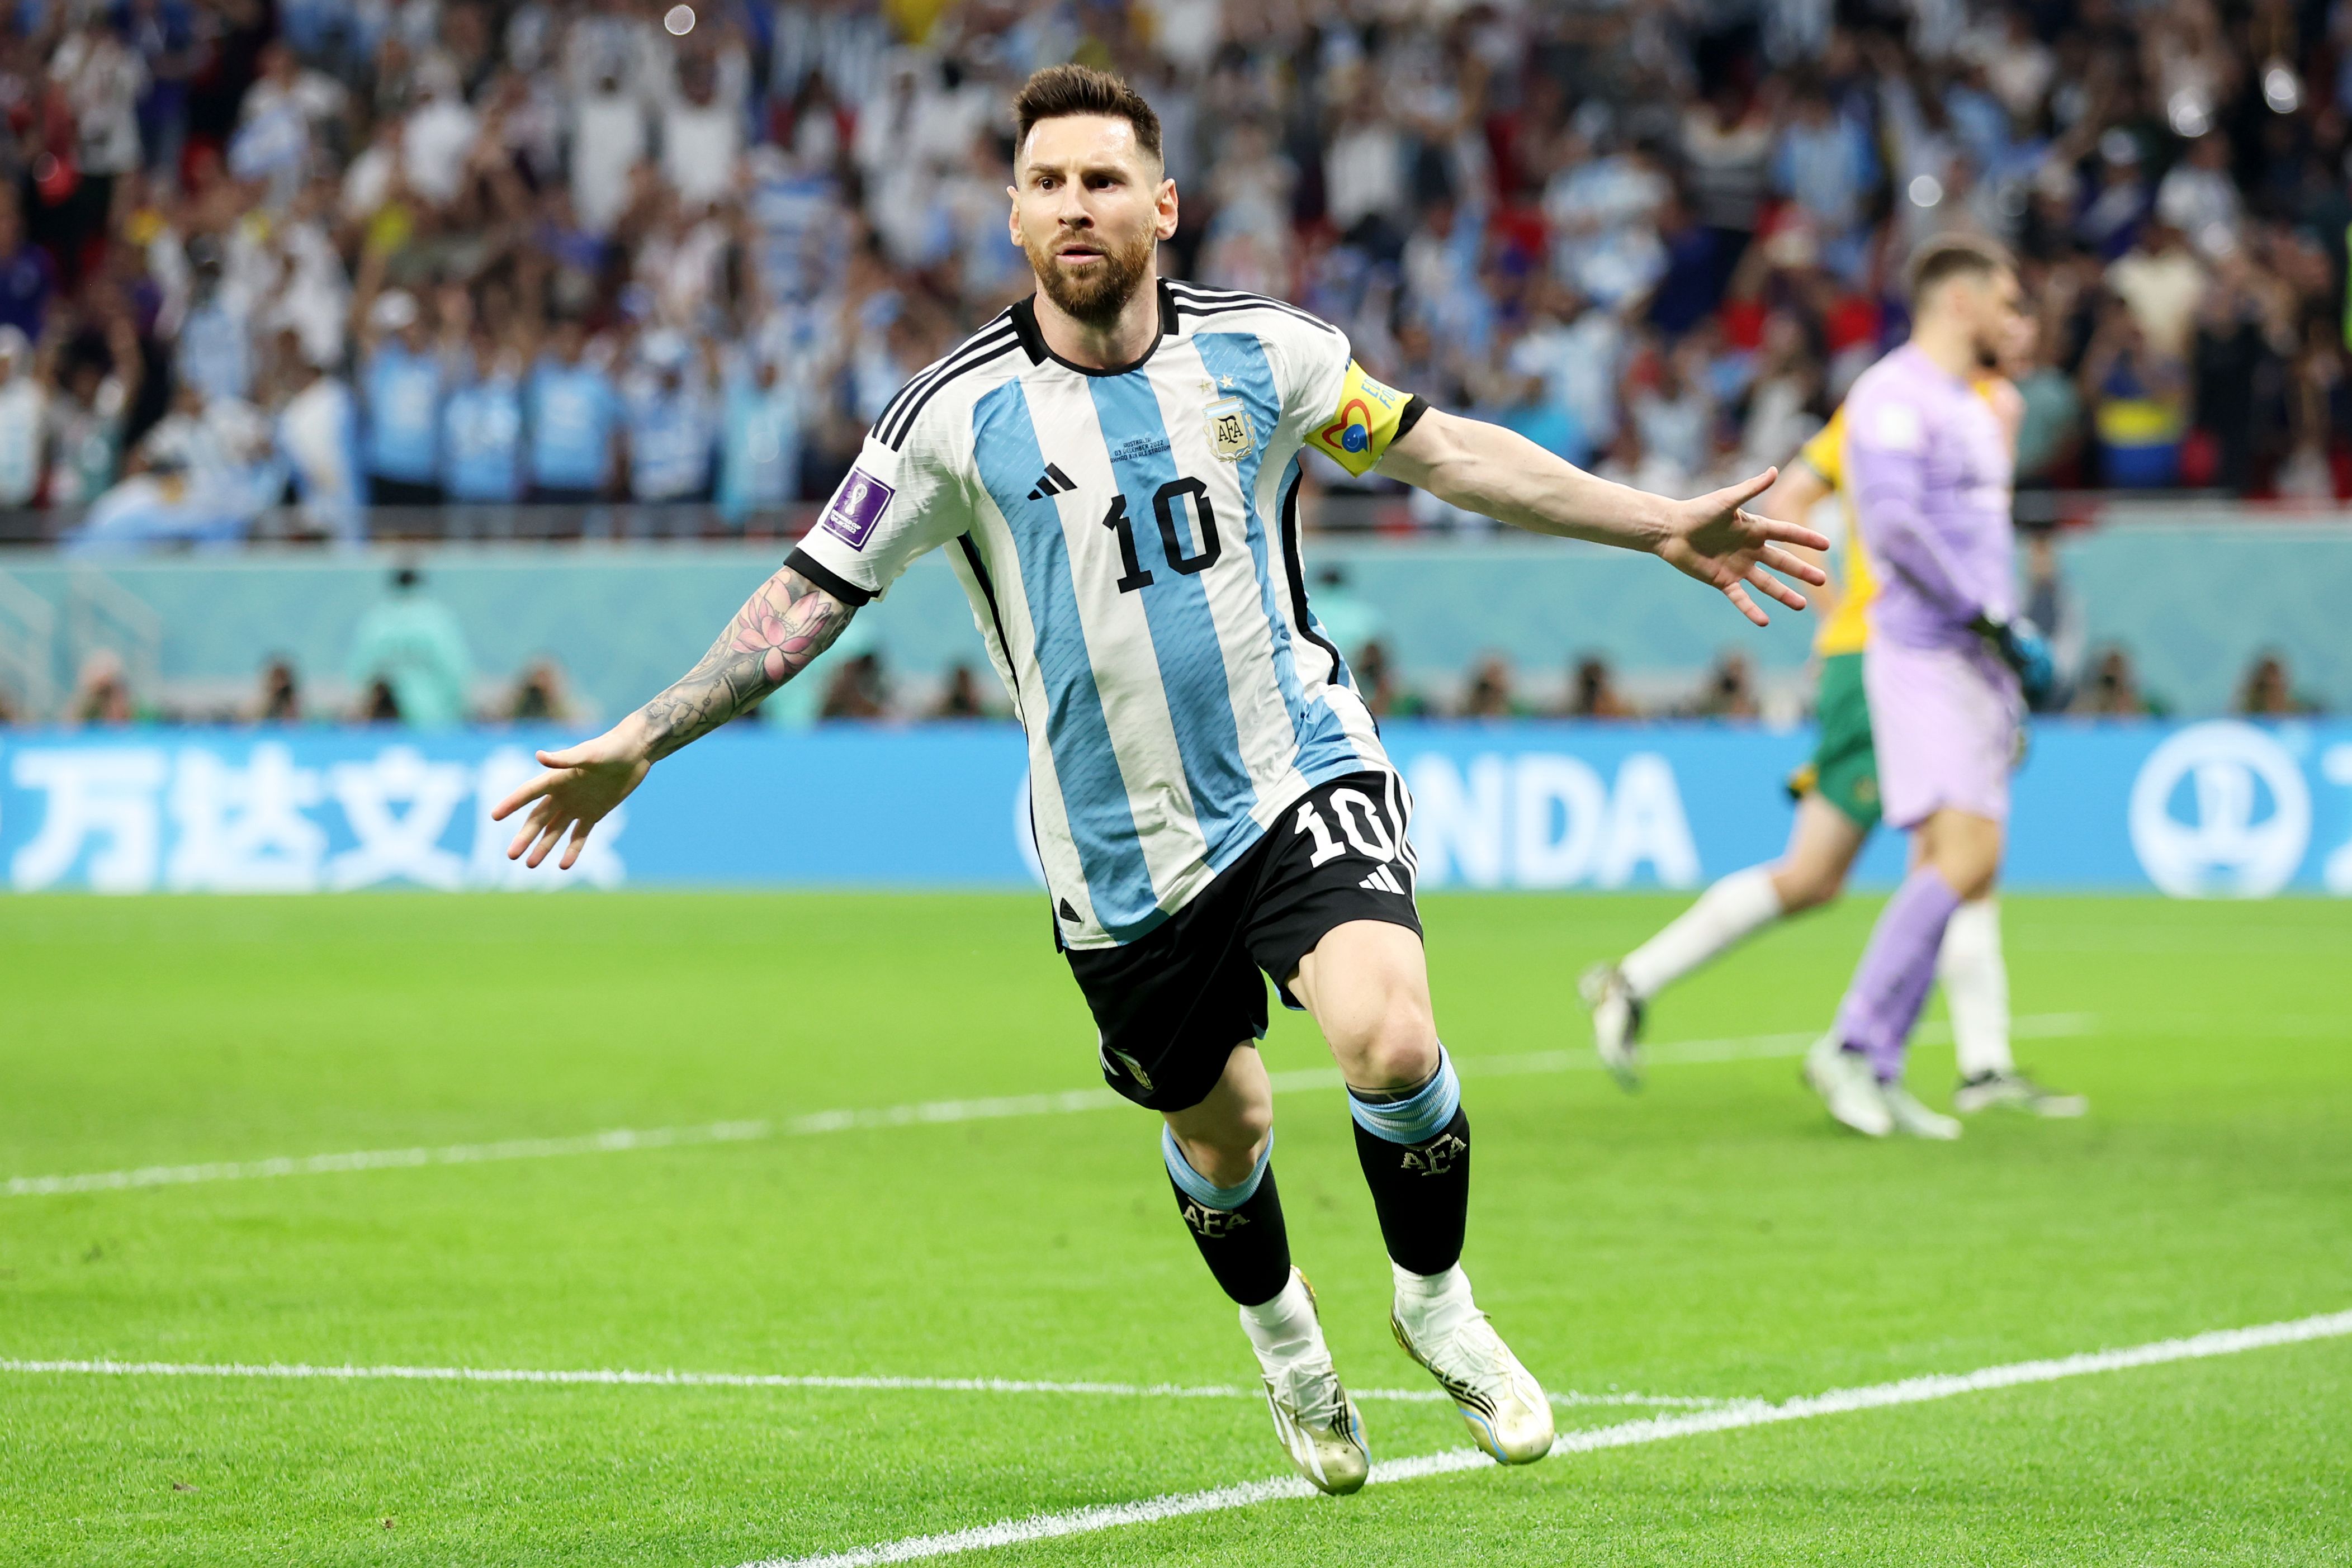 Lionel Messi scores in 1000th career game as Argentina reaches World Cup quarterfinals 